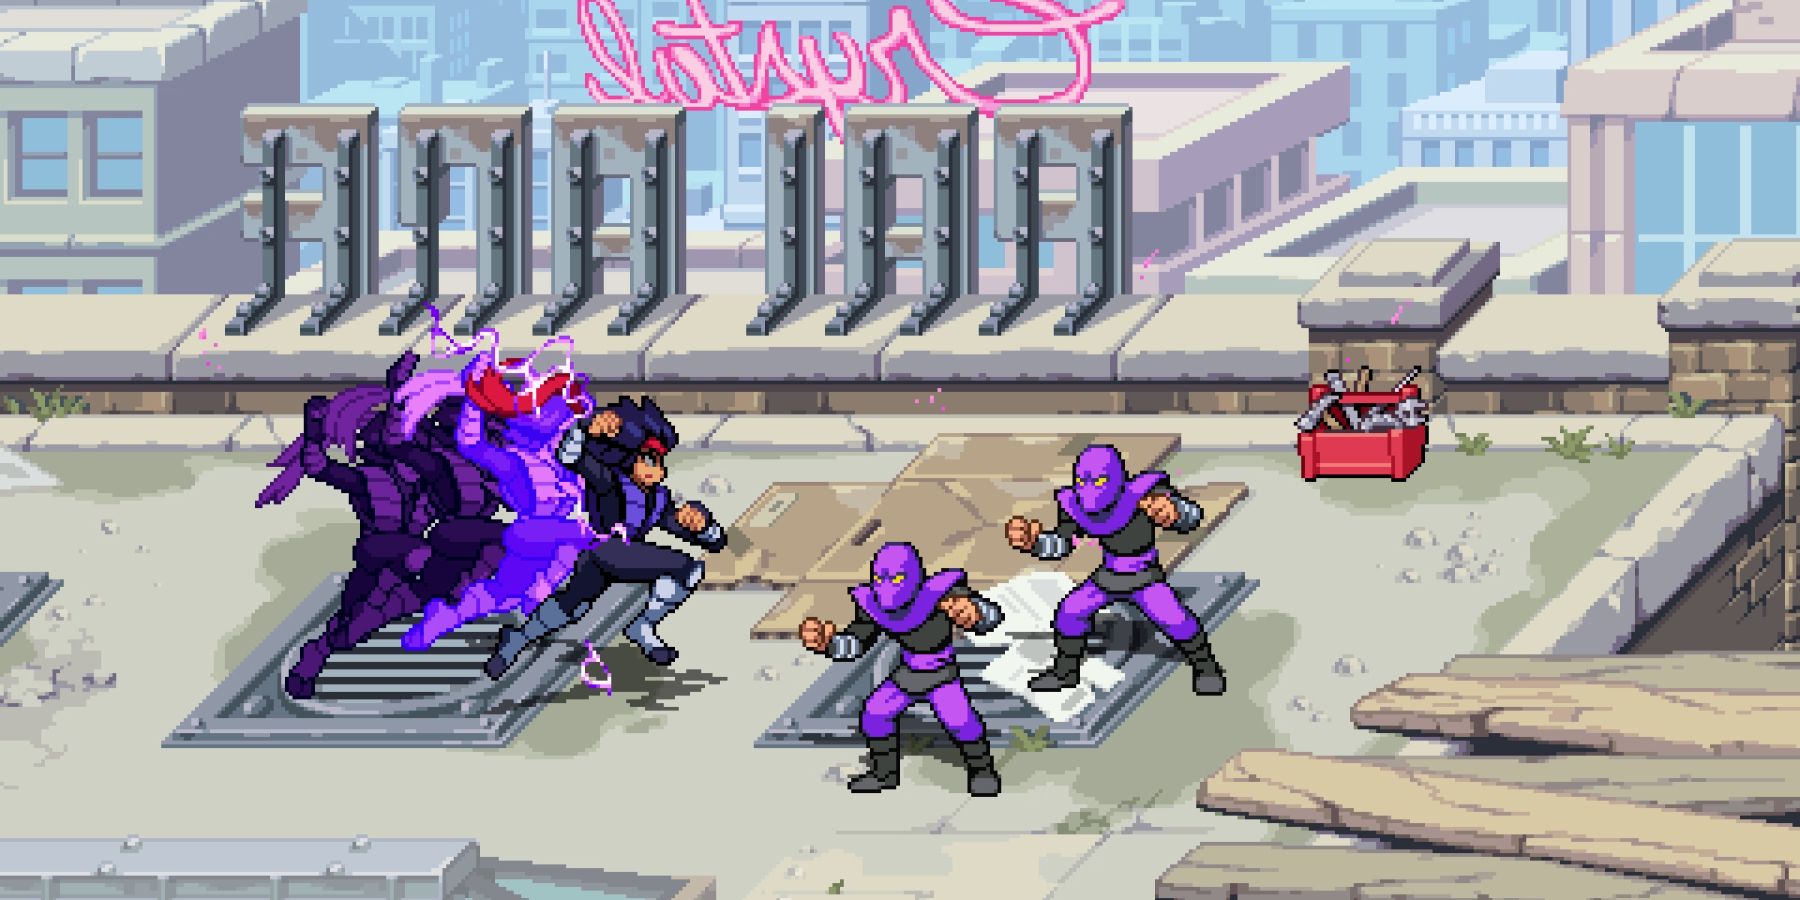 A gameplay screenshot from Dimension Shellshock showing Karai fighting two Foot Soldiers on a rooftop.